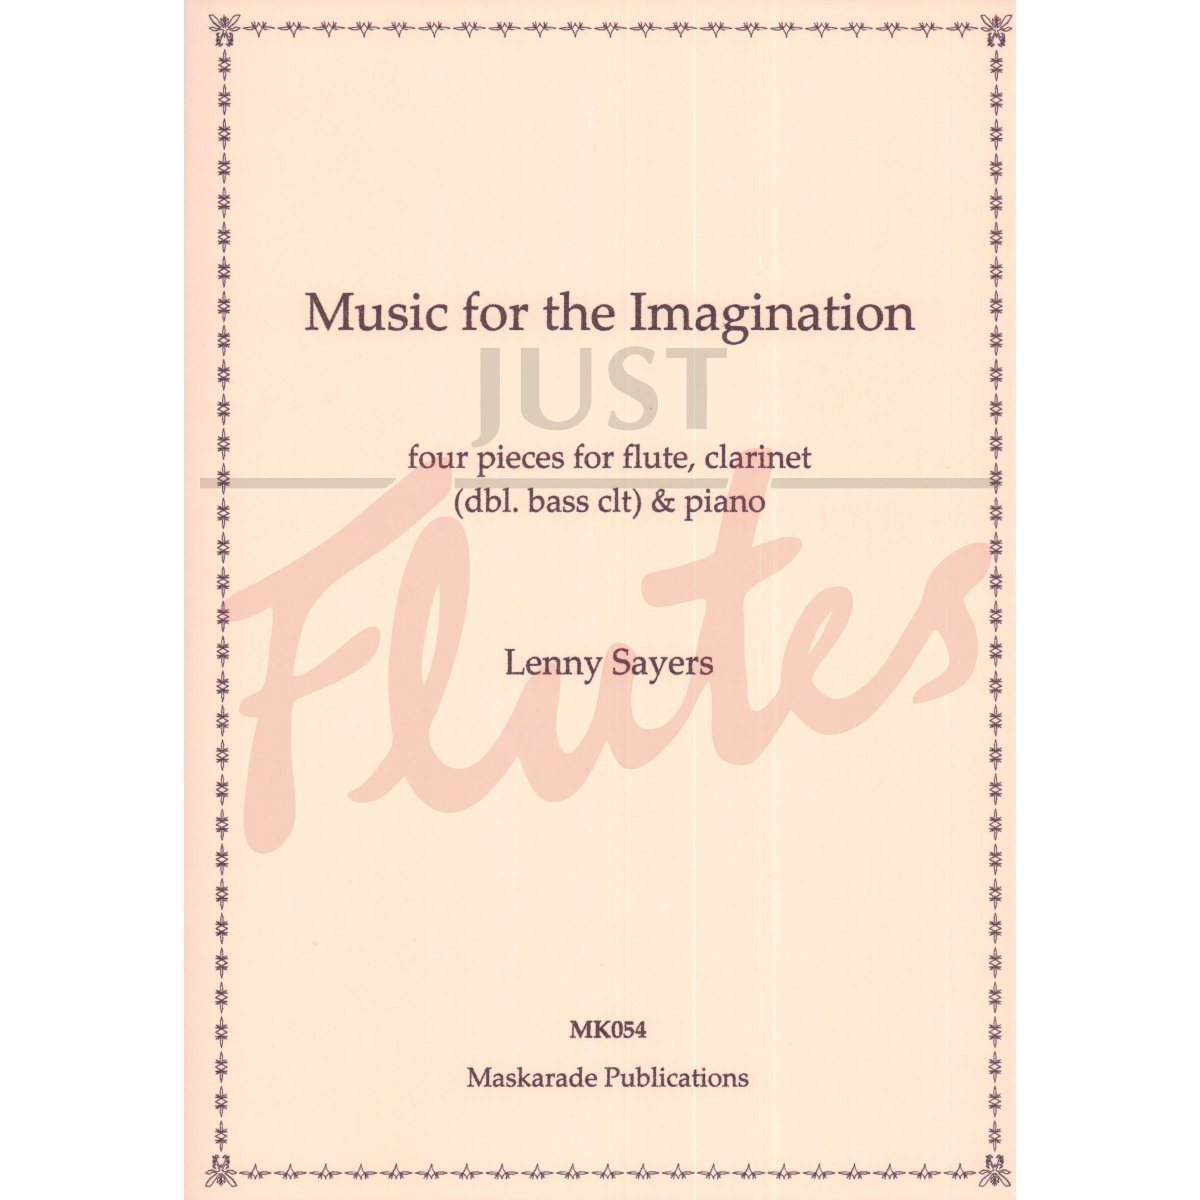 Music for the Imagination for Flute, Clarinet (doubling on Bass Clarinet) and Piano